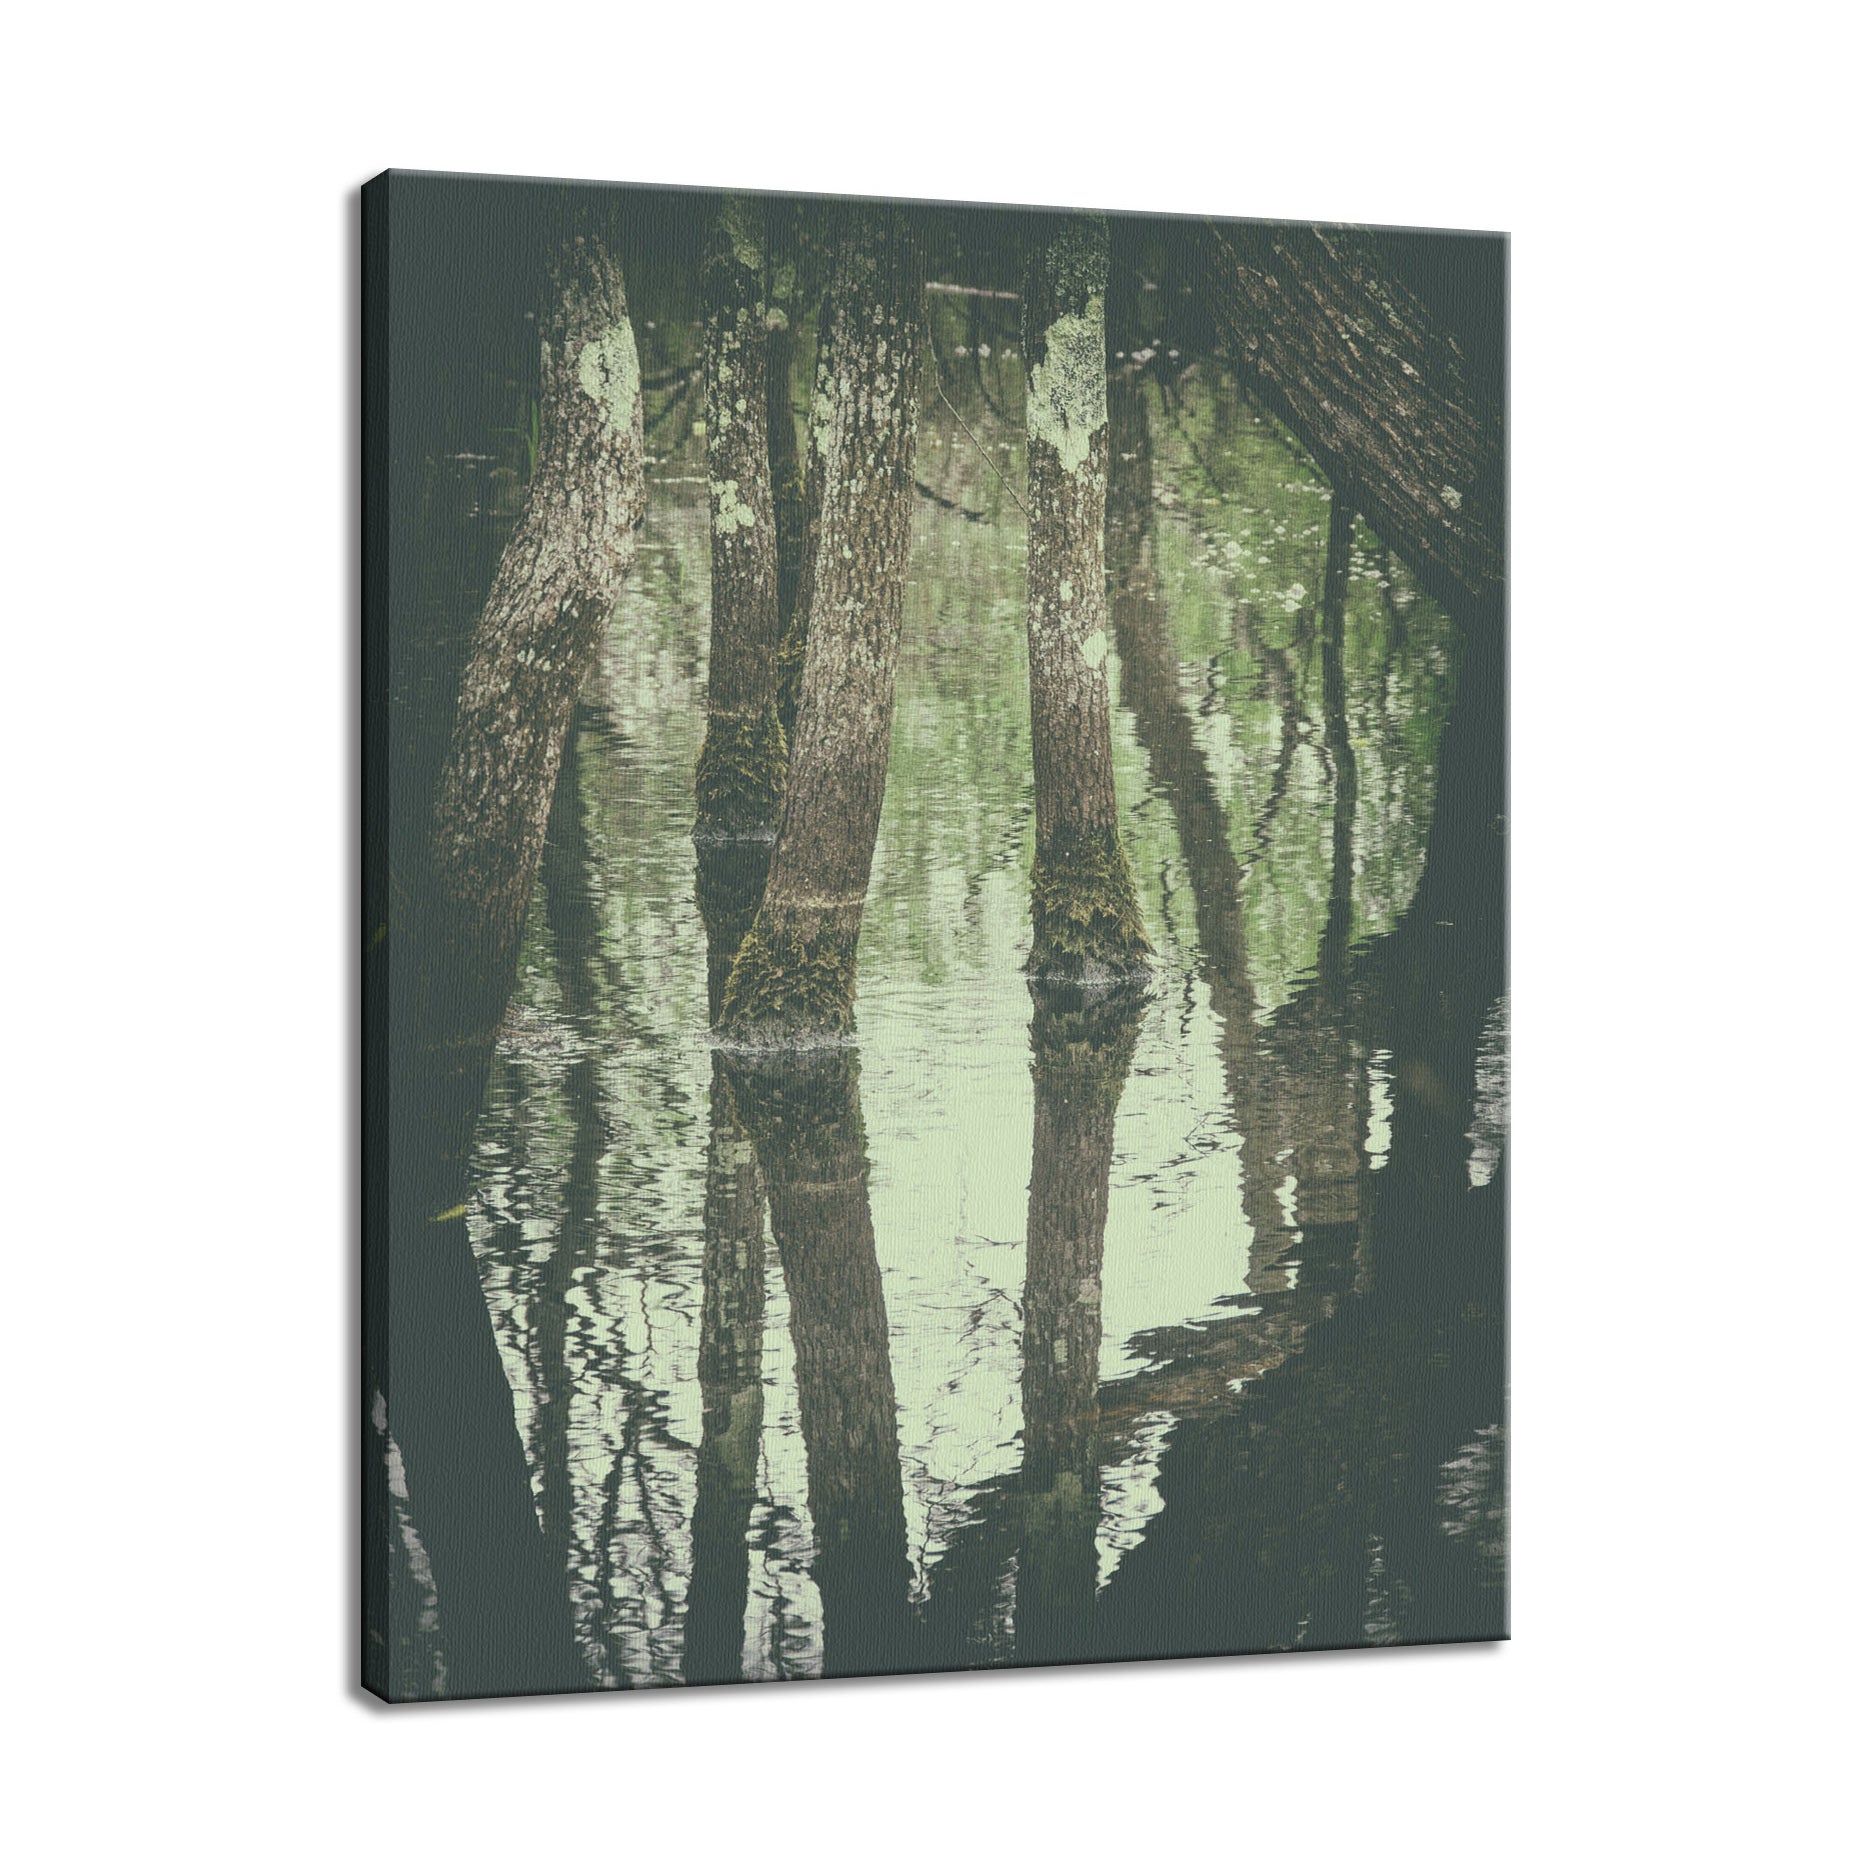 Early Spring Reflections on the Marsh Botanical / Nature Photo Fine Art Canvas Wall Art Prints  - PIPAFINEART